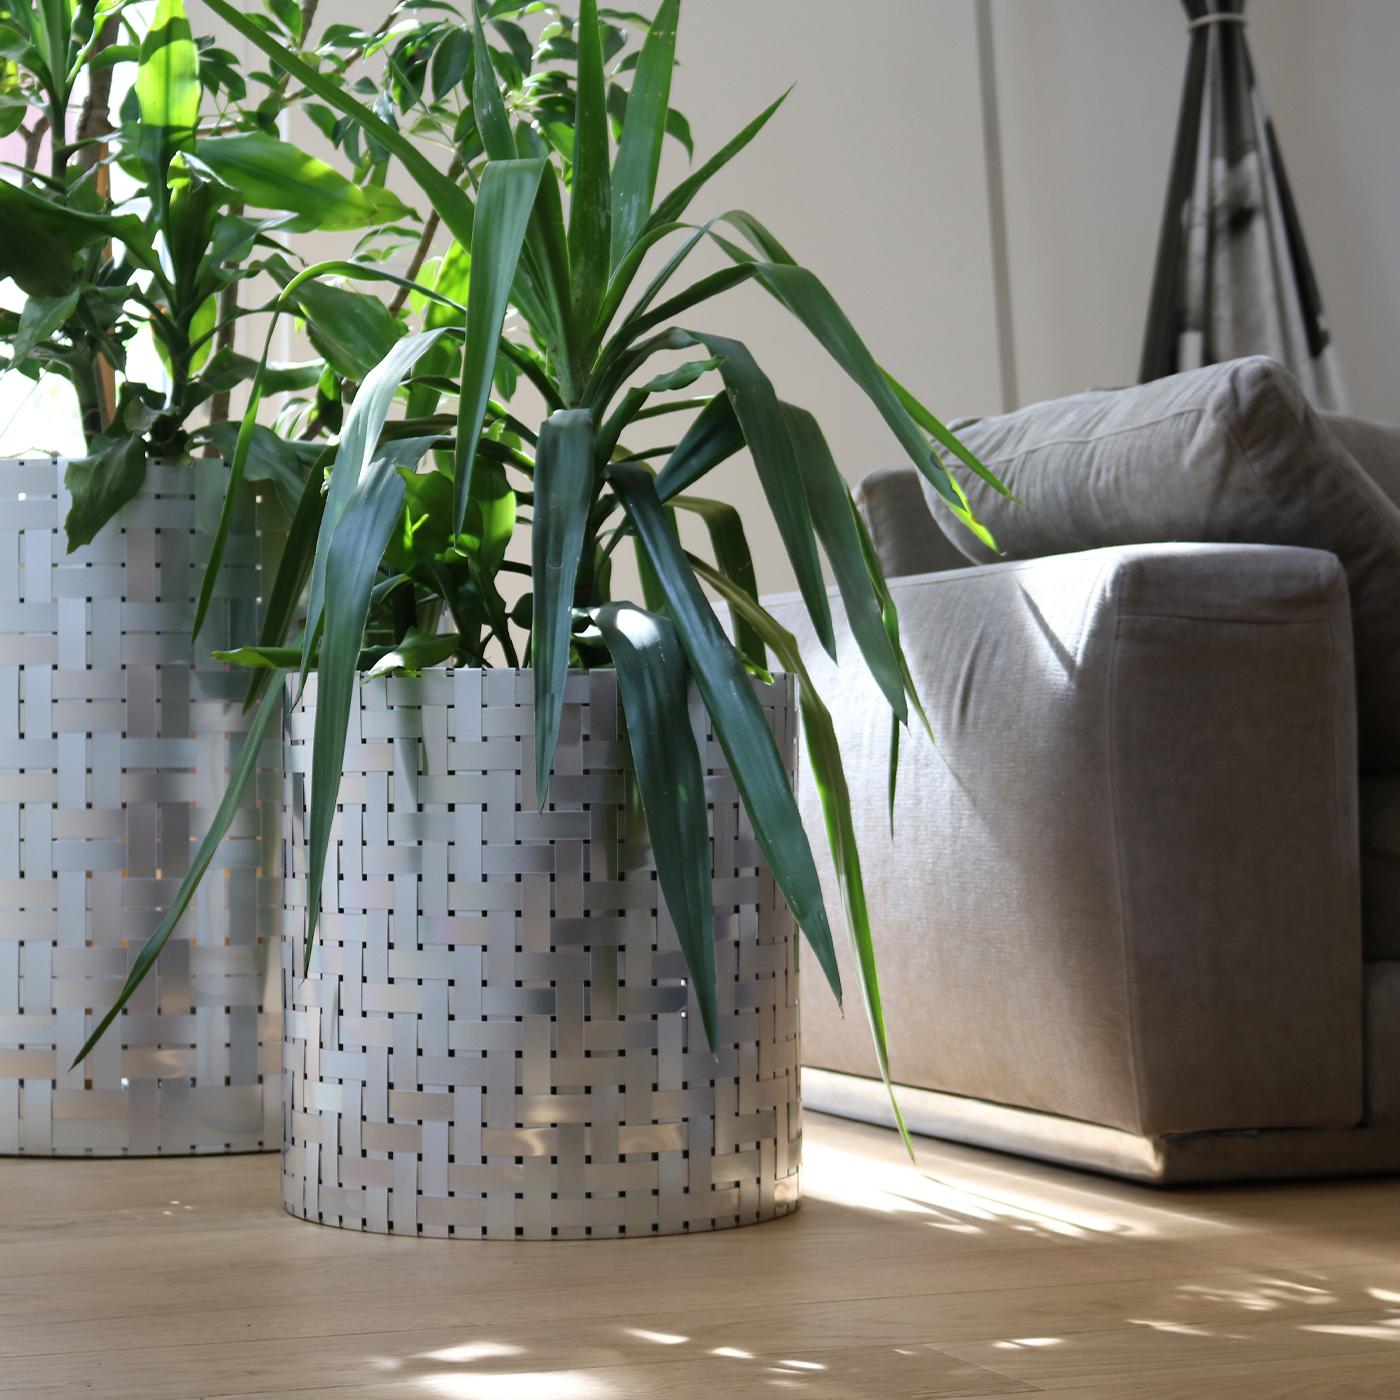 50Splot4flowers is a steel vase cover covered with Splot, a handmade aluminum weave, by the Inthegarden design studio in a variety of textures and finishes. Ideal to use with indoor or outdoor plants, it will provide the perfect furnishing style for